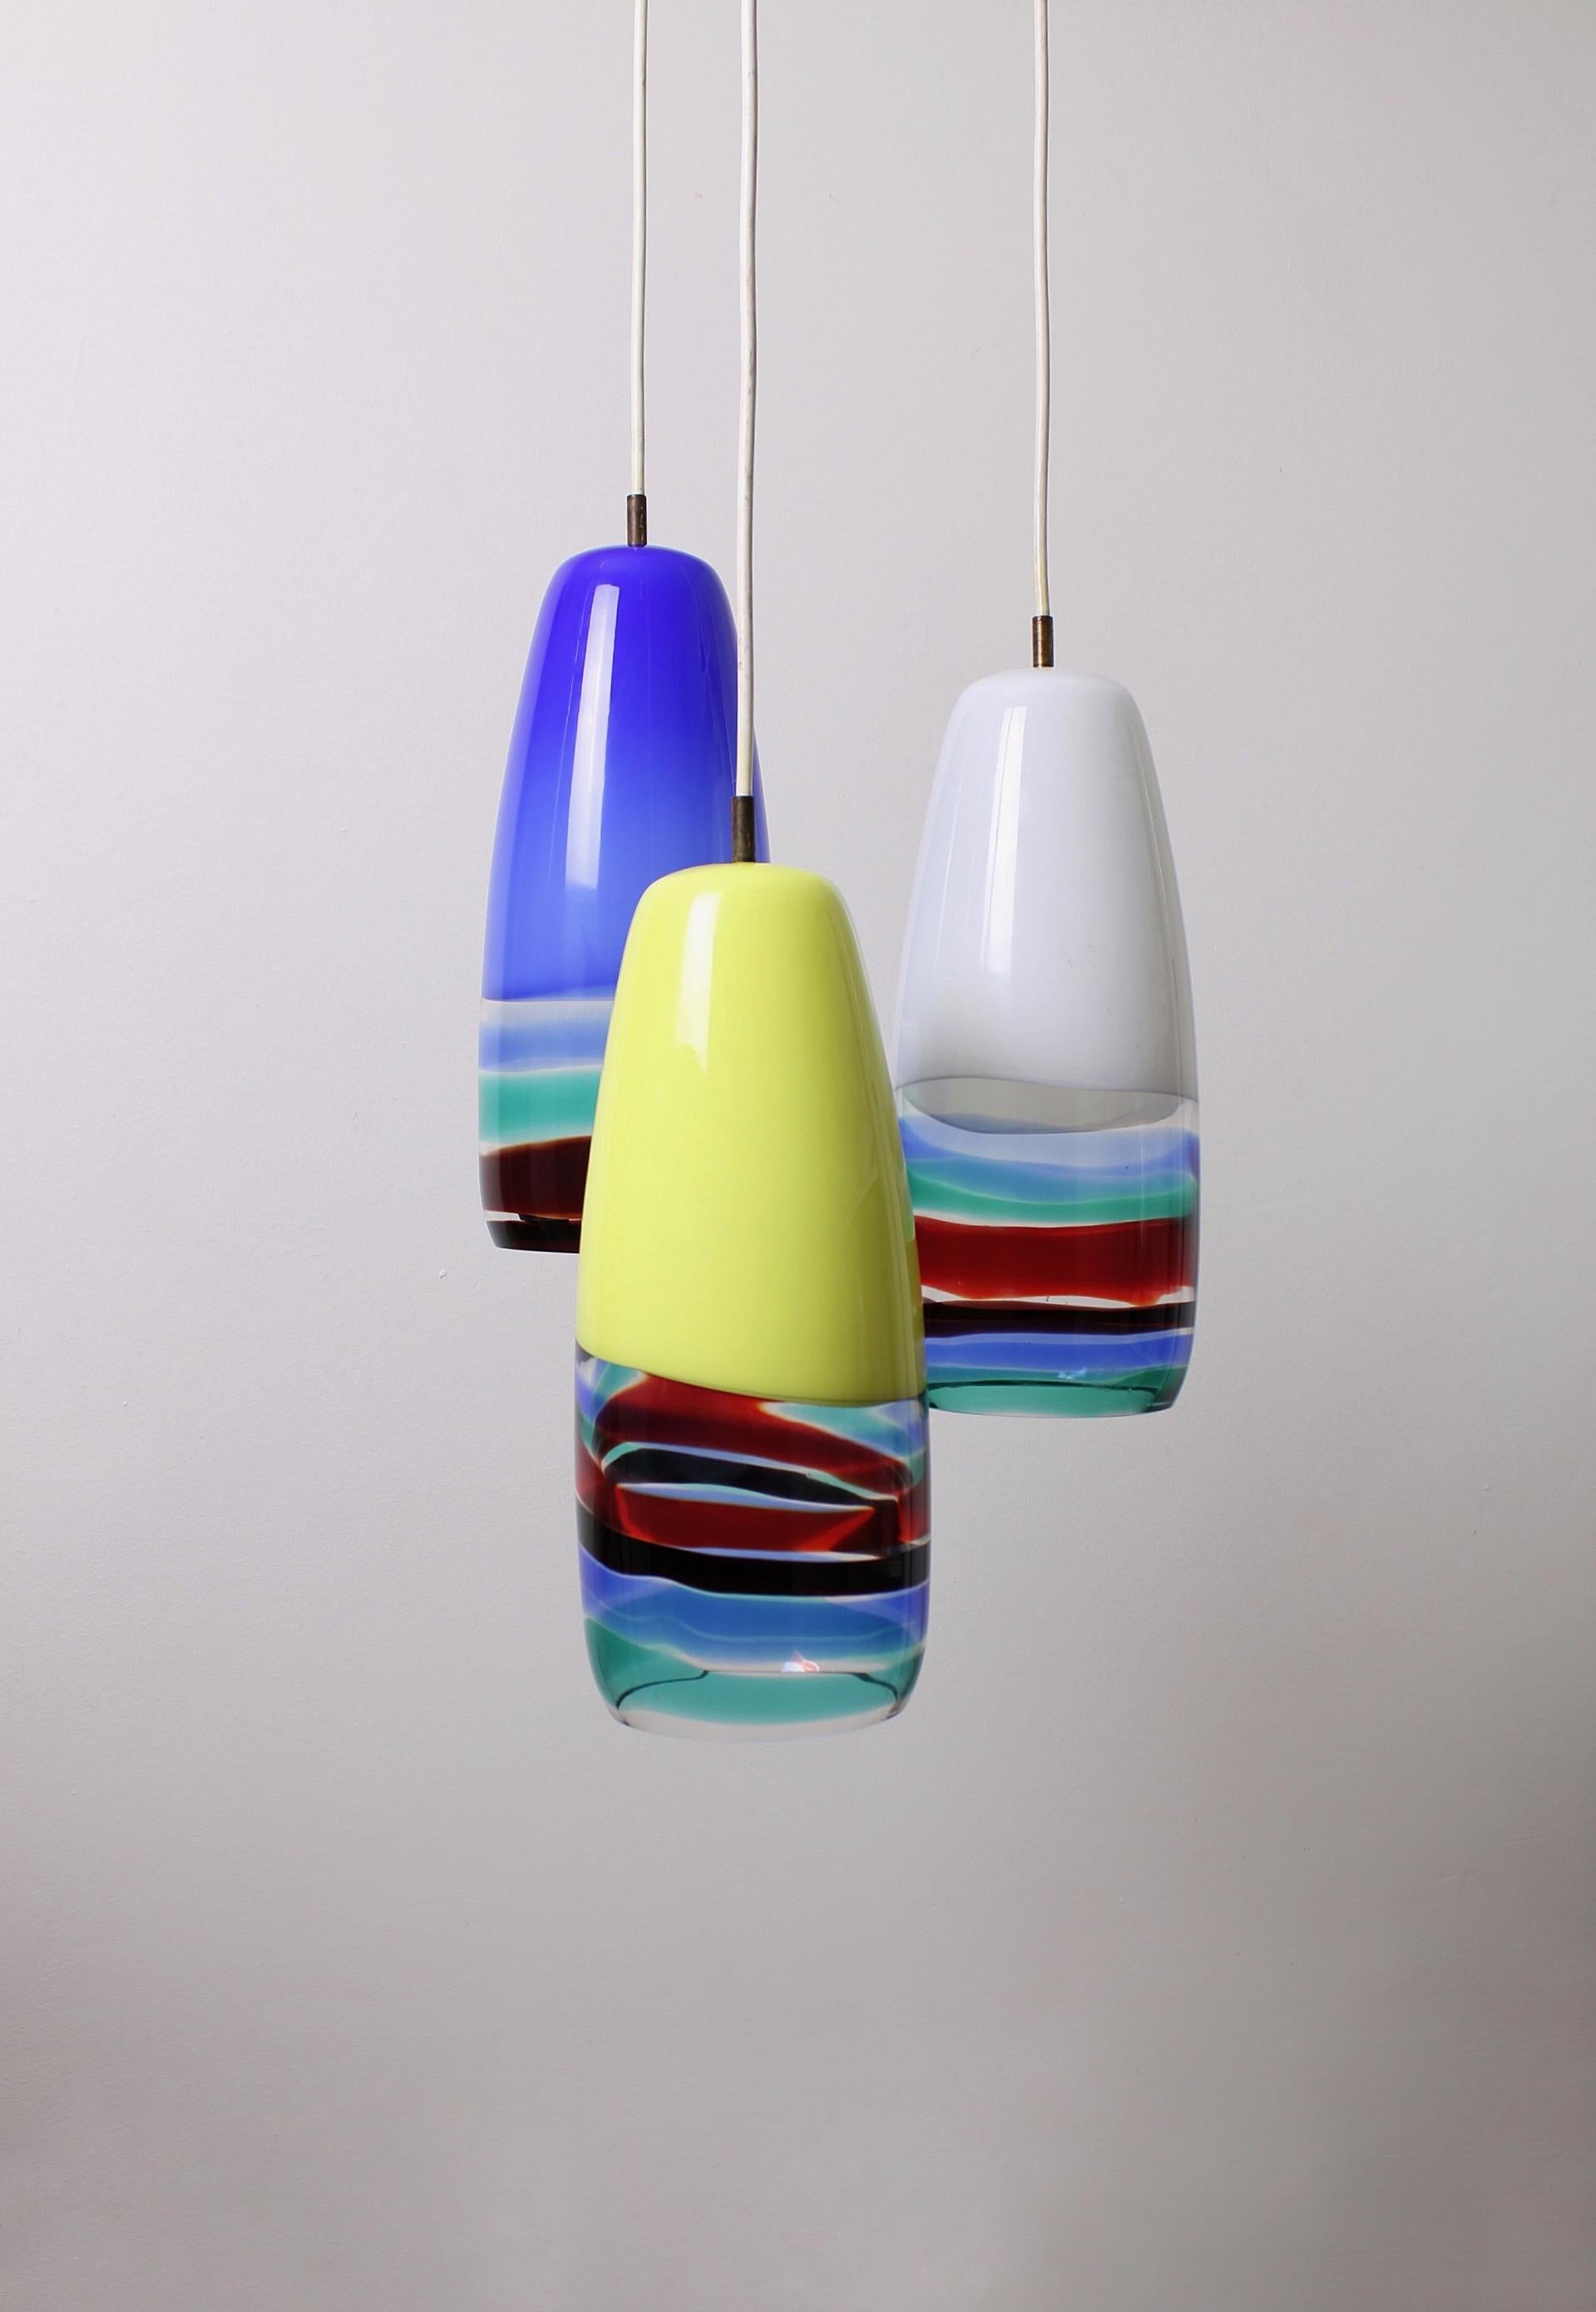 Iconic set of three Sigaro pendant lamps, designed during the collaboration between Massimo Vignelli and Venini in 1956. The lamps are made of lattimo glass with multicolored bands on the bottom of the lamp. Vignelli designed the lamps to be